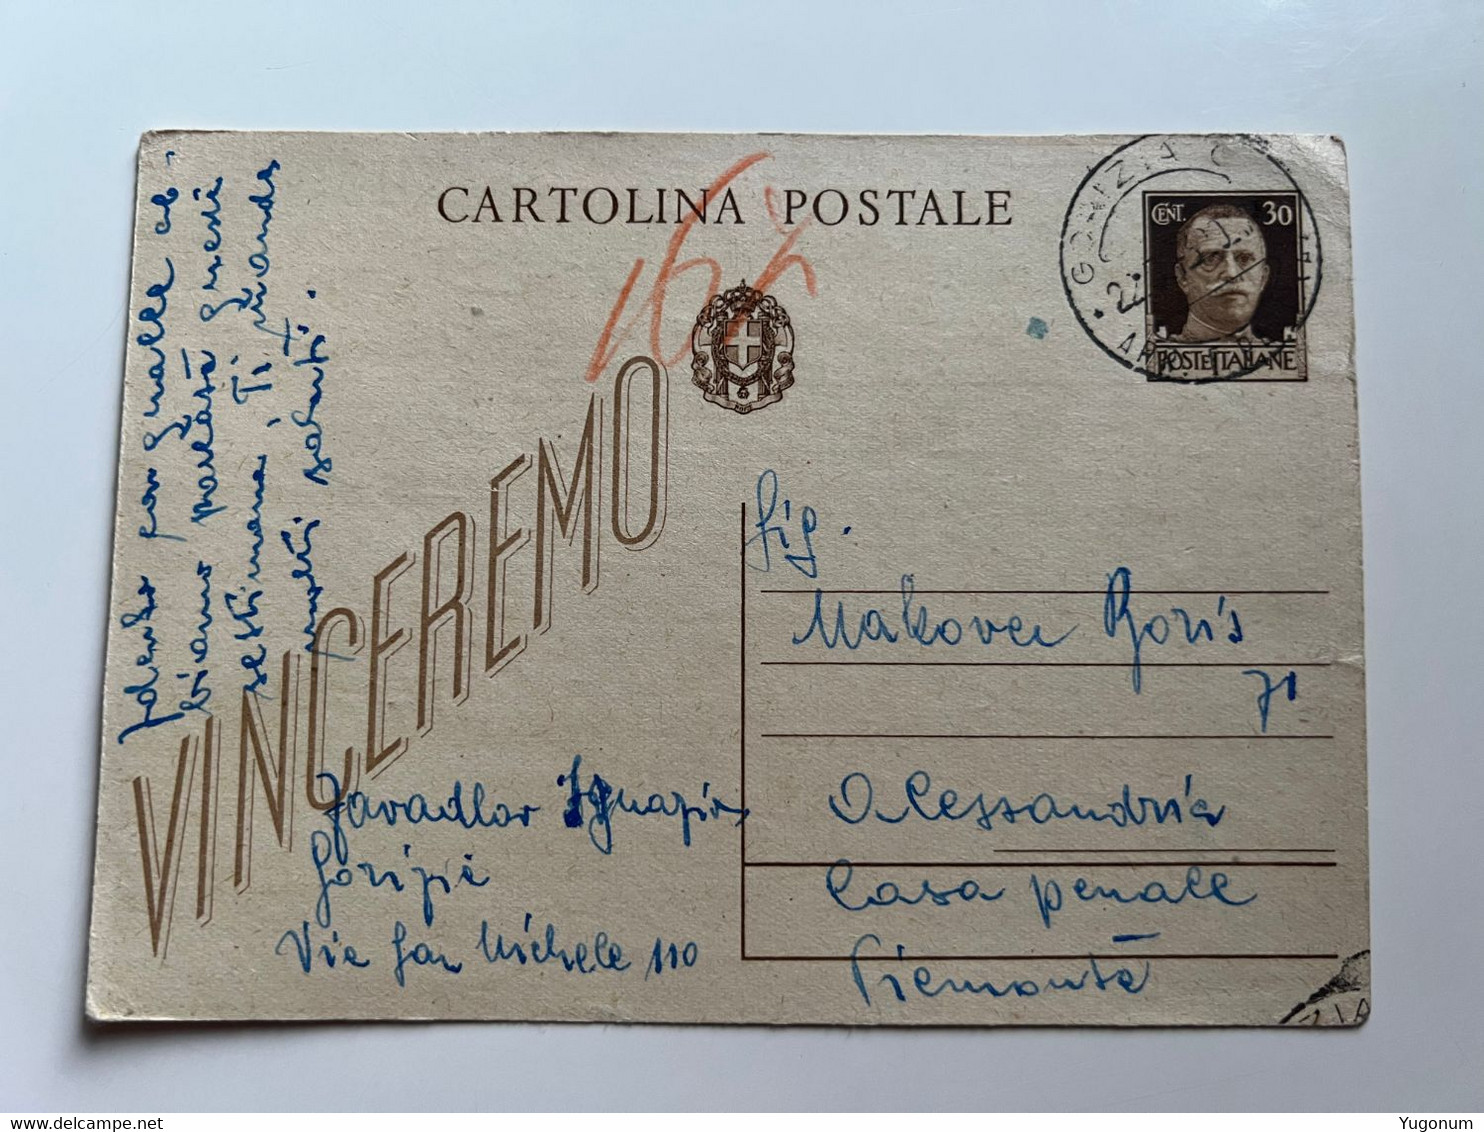 WWII ITALY Stationery Card 1943 Sent From GORIZIA To ALESSANDRIA Casa Penale With Censorship Stamp (No 1909) - Ljubljana